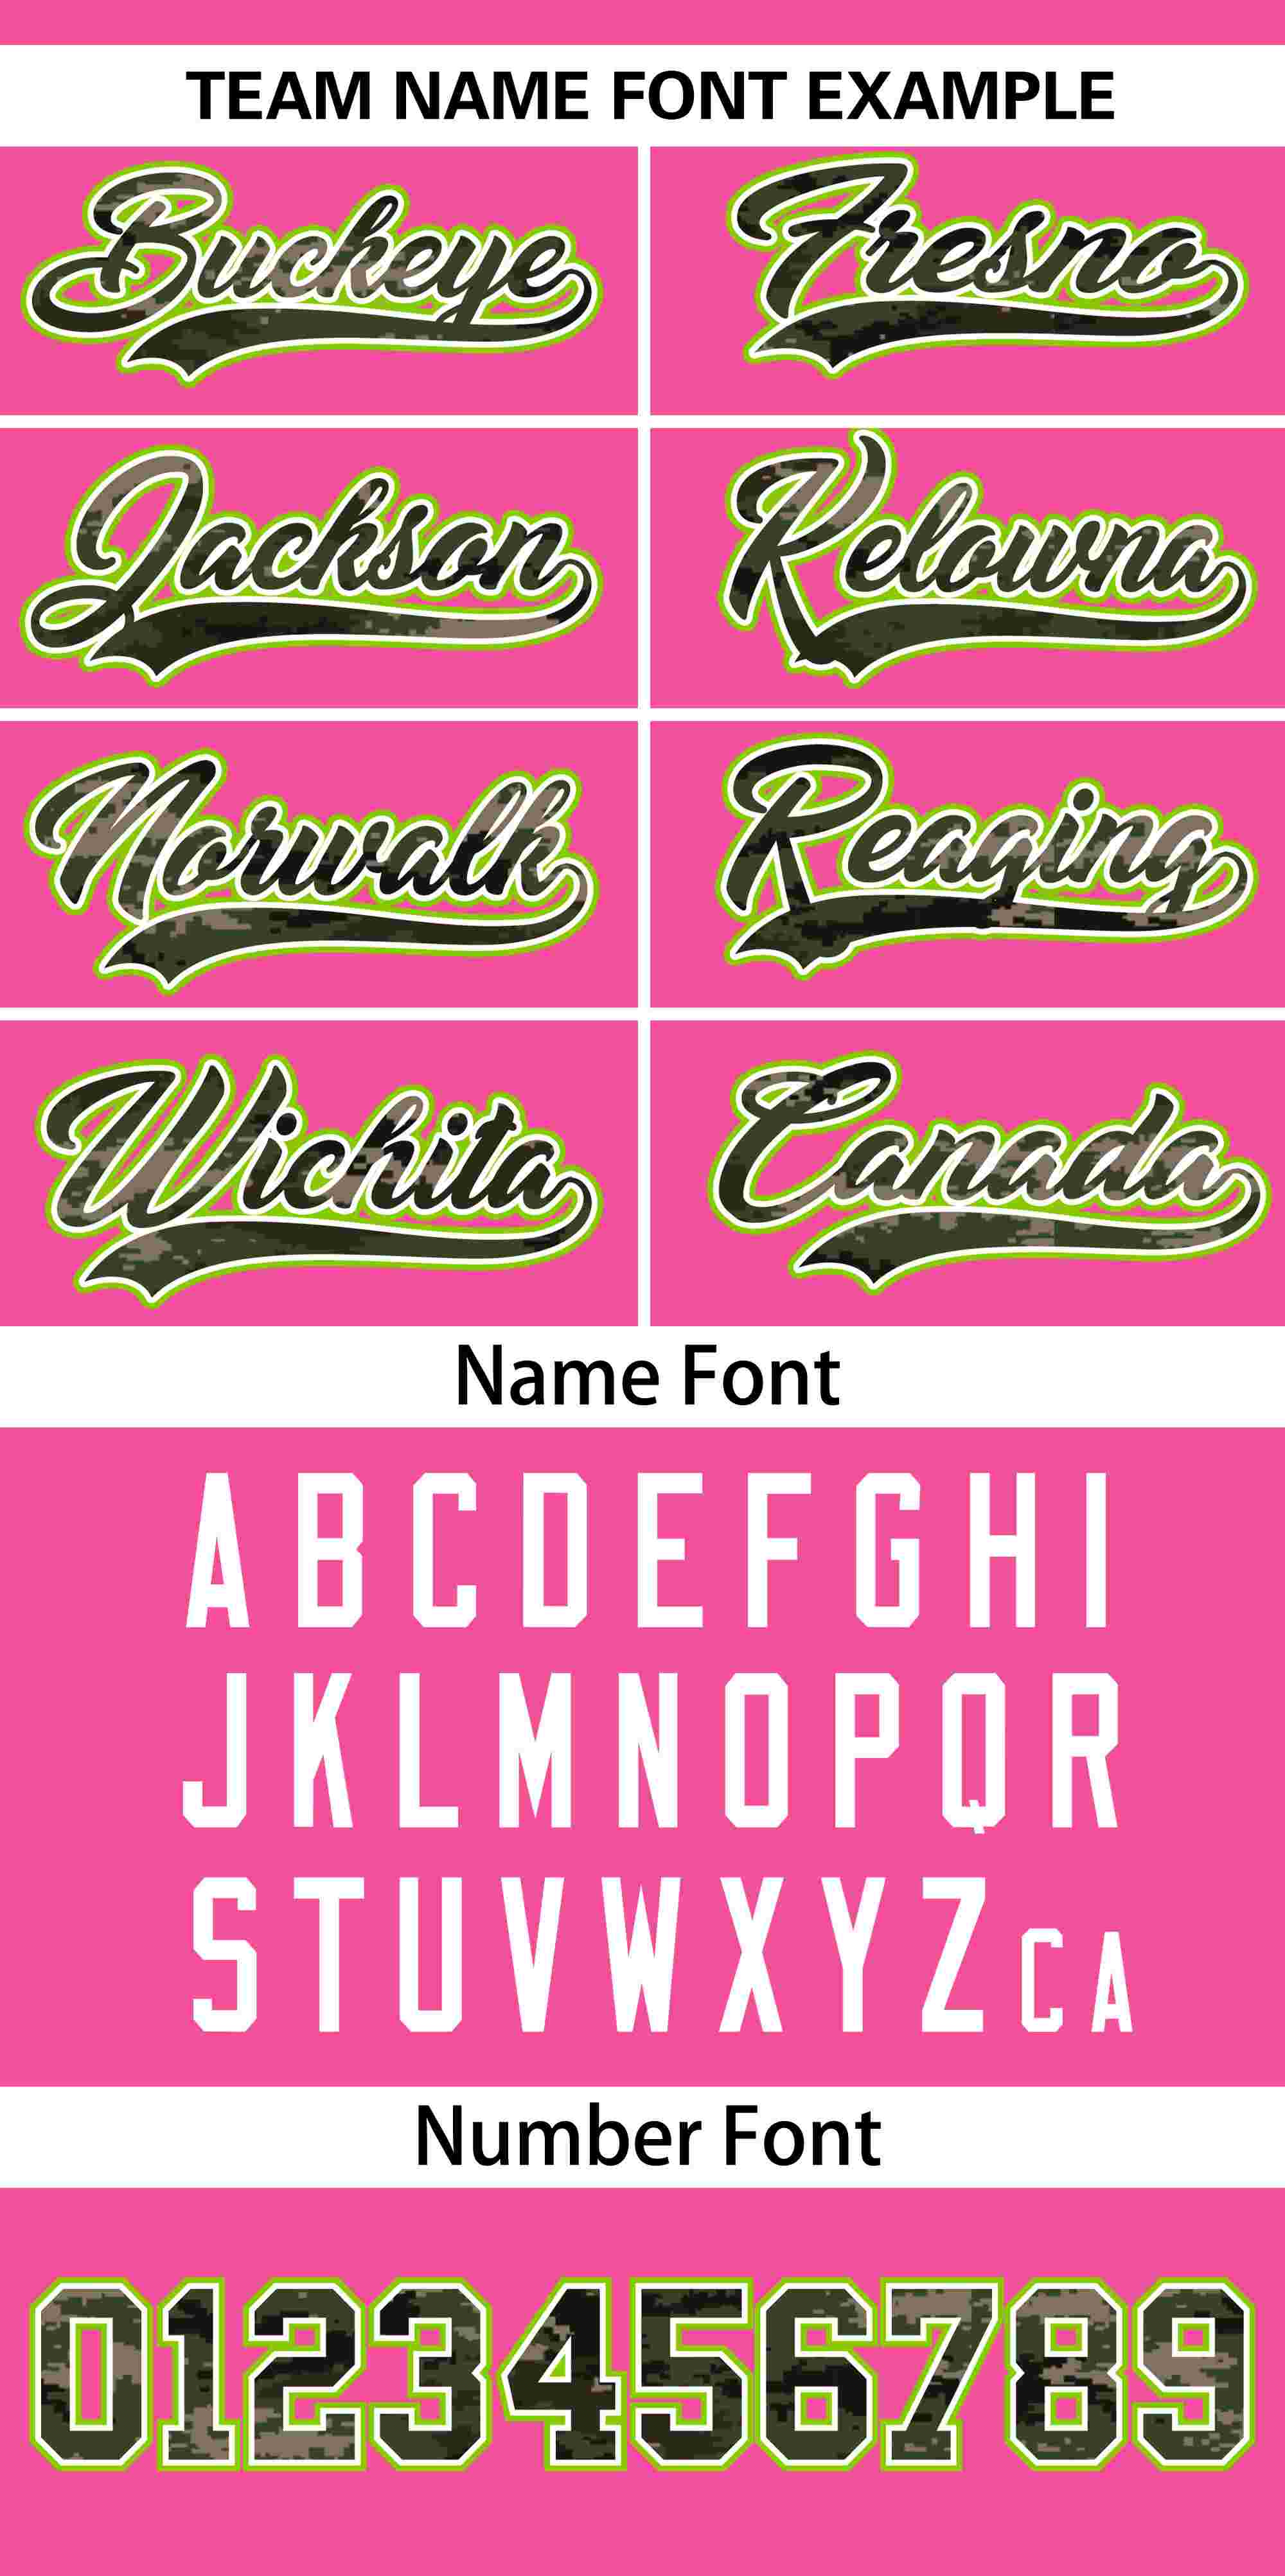 Custom Pink Personalized Camo Font Authentic Baseball Jersey